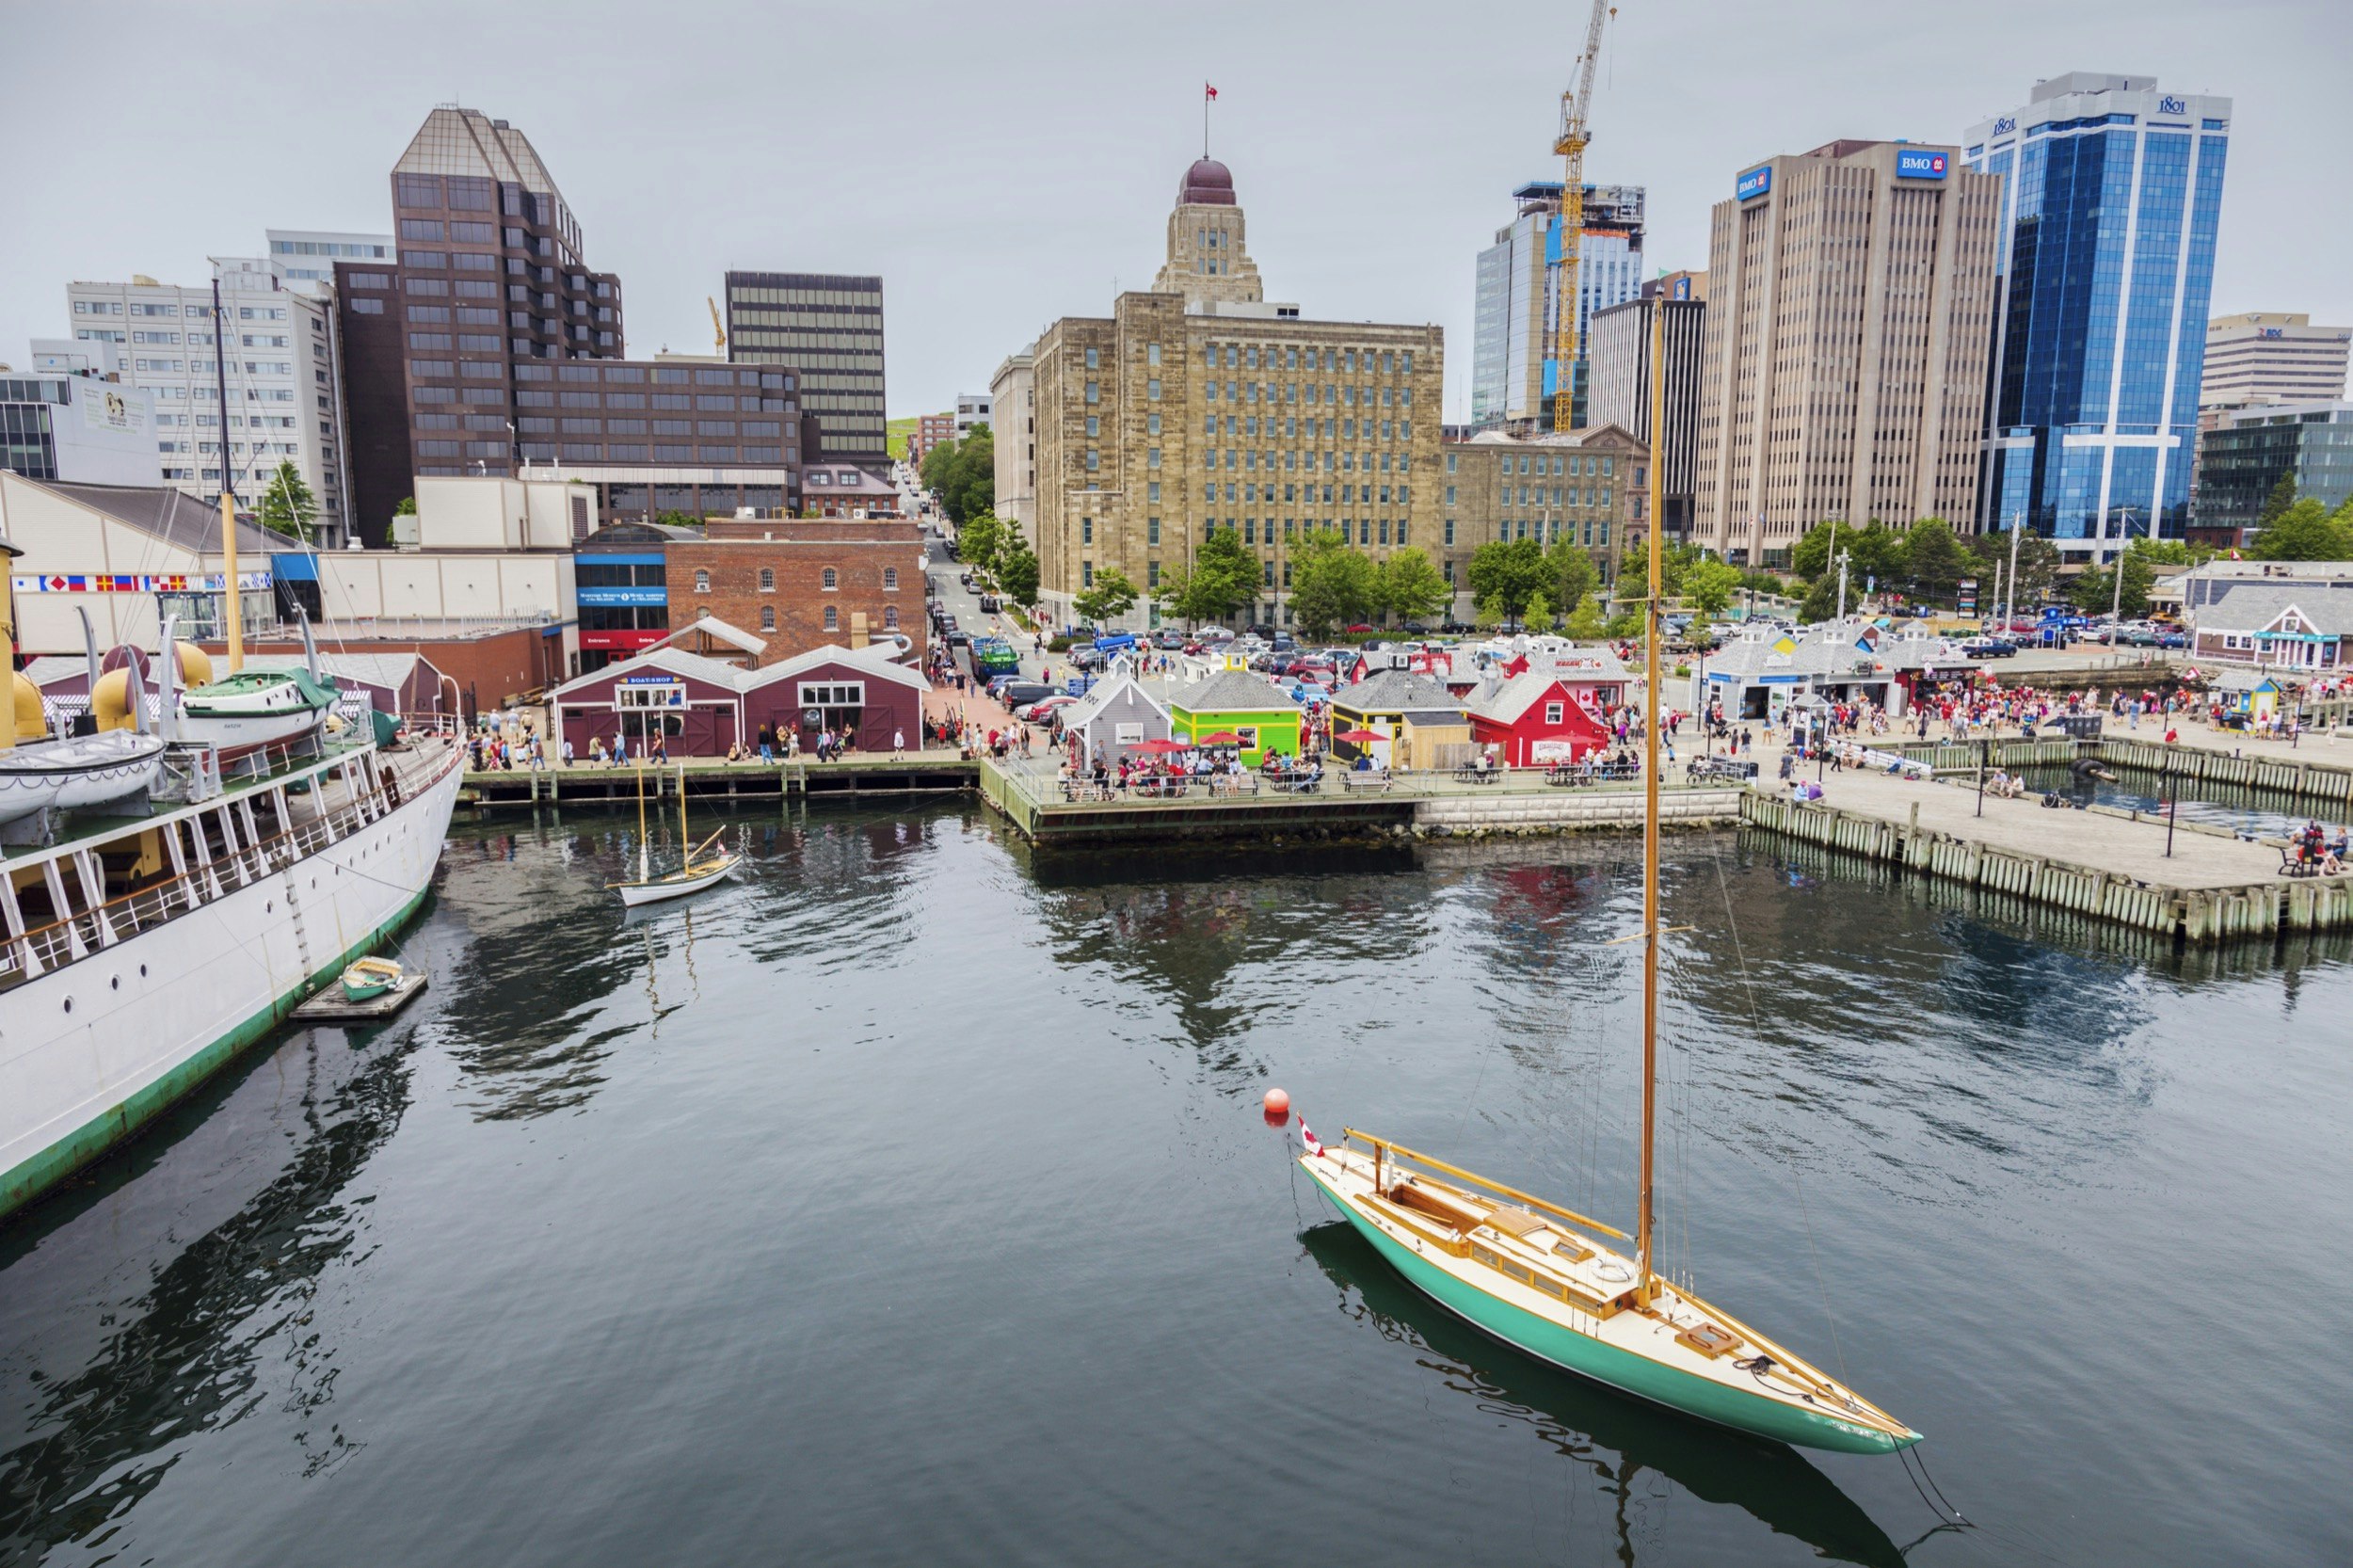 A panorama of Halifax, Nova Scotia sees the waterfront with a sailboat in the foreground and several tall buildings downtown